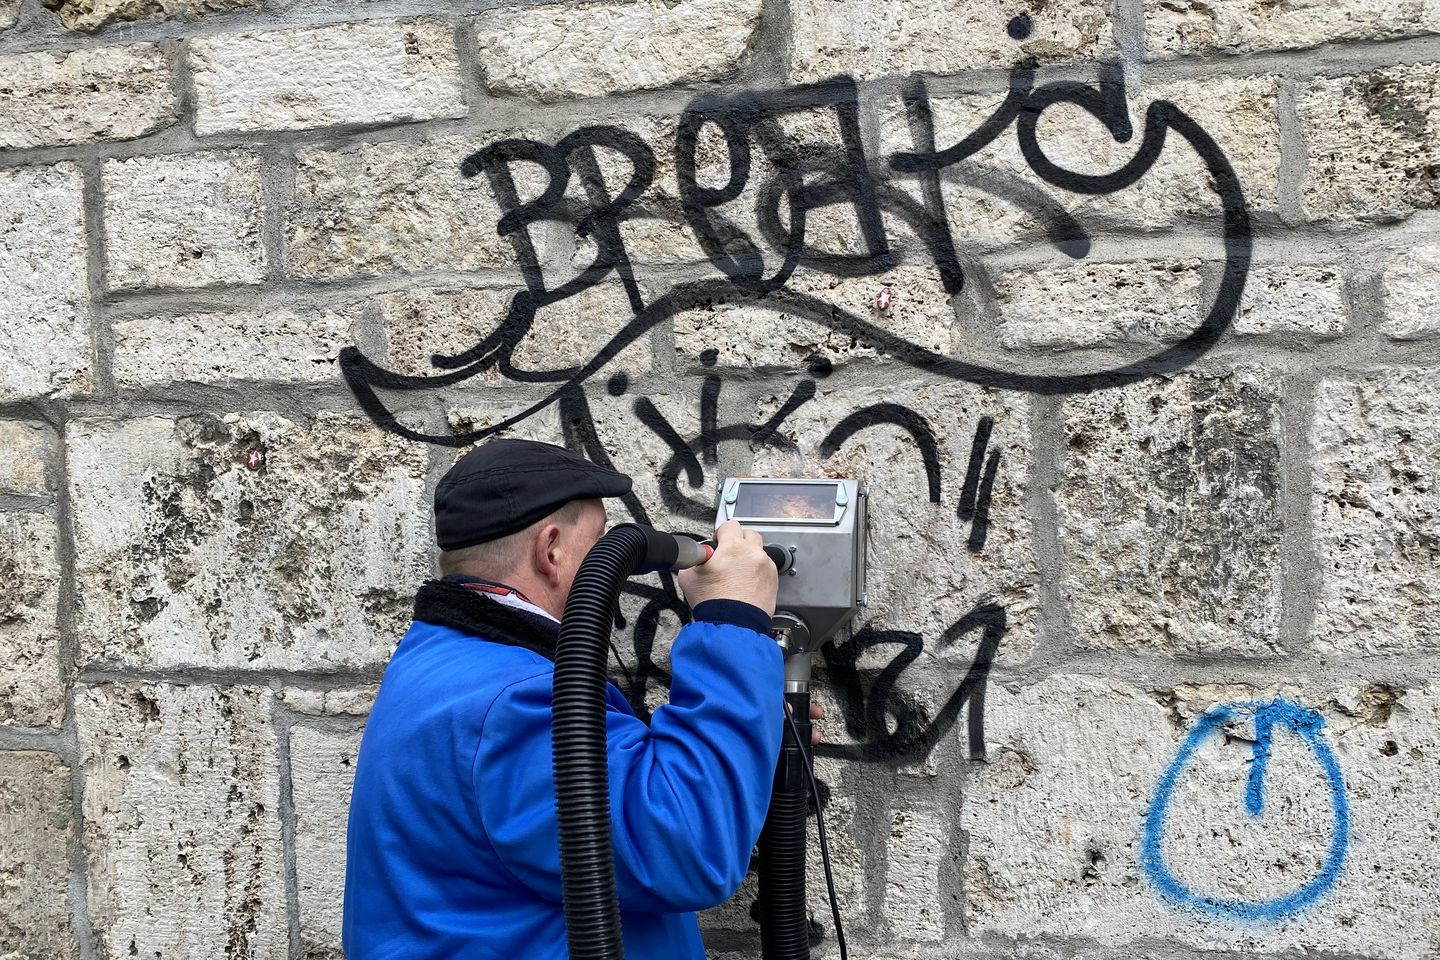 ecological graffiti removal without chemicals